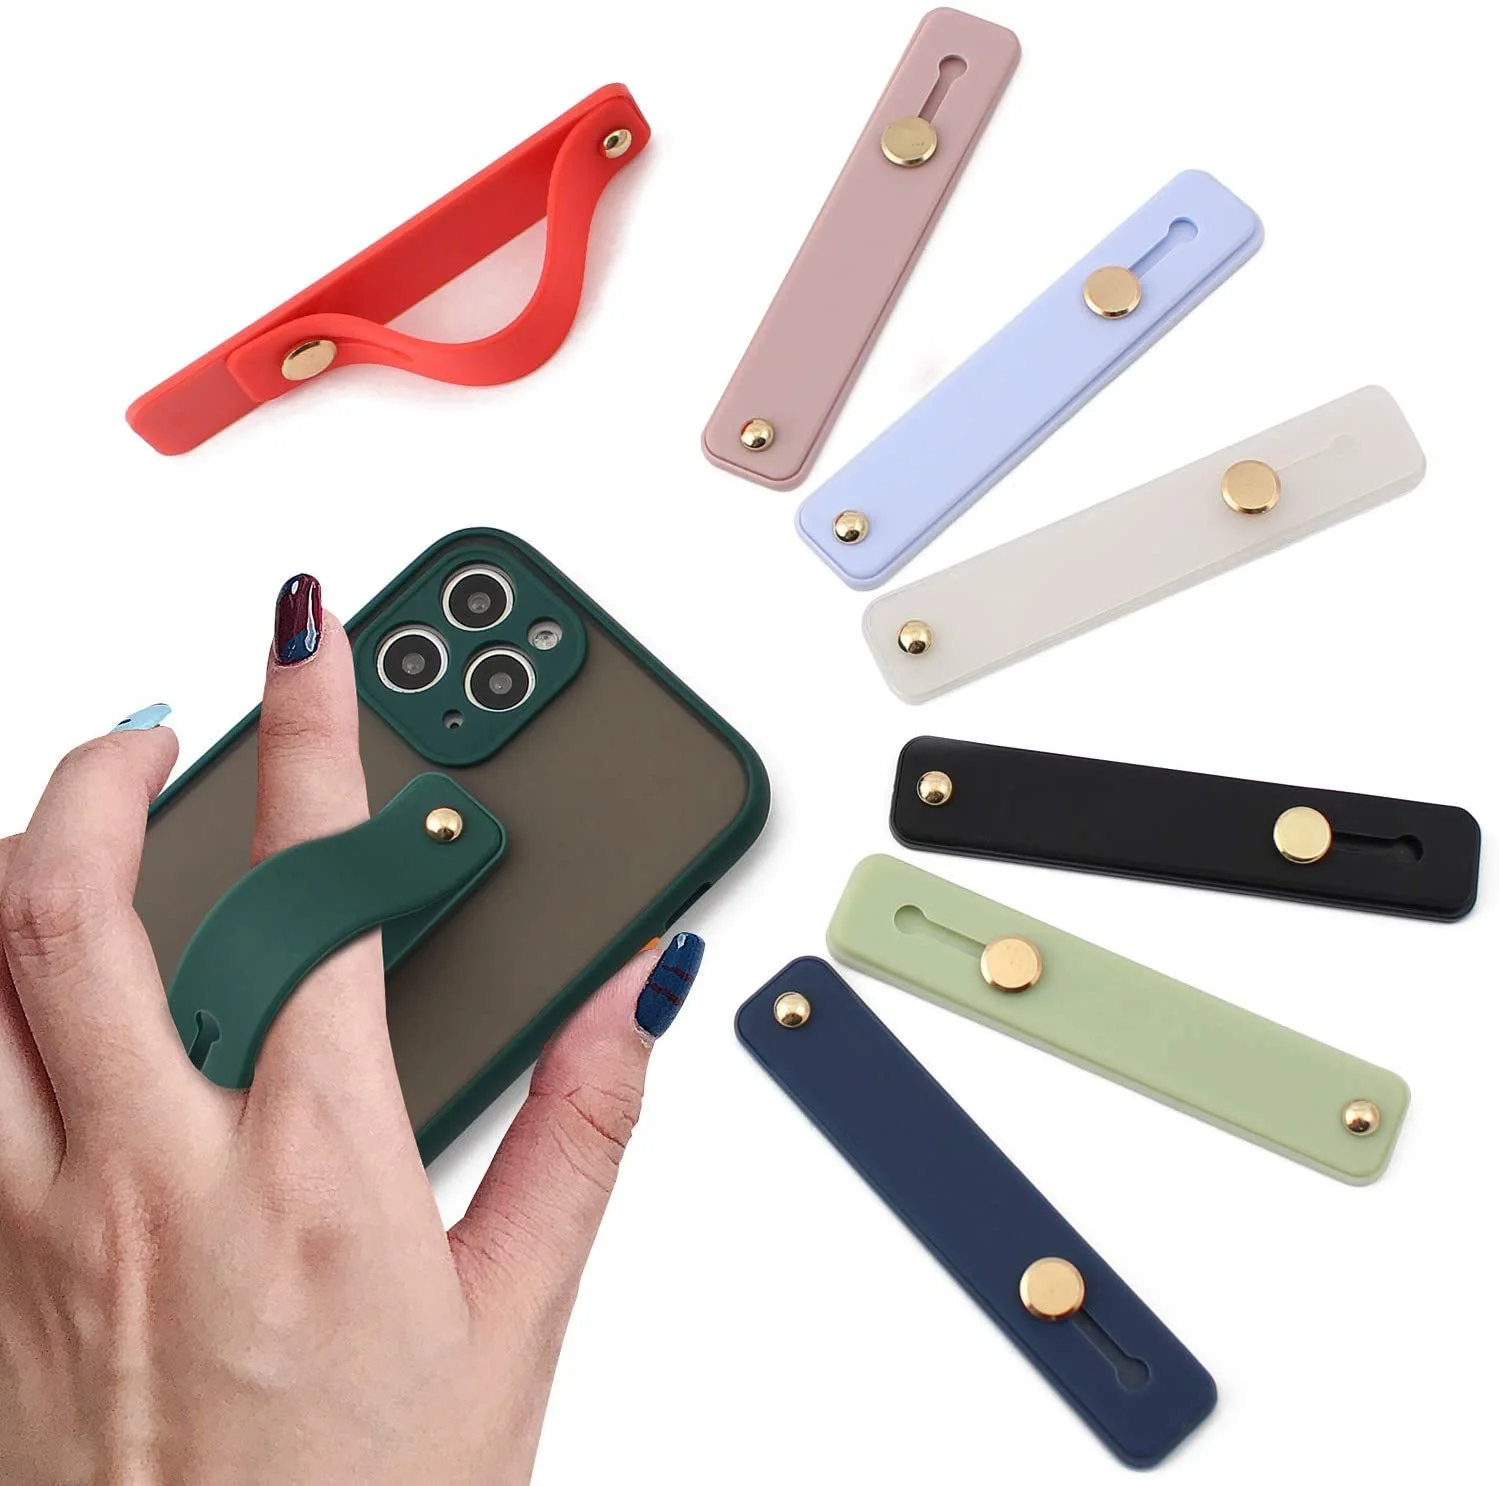 

Universal Popular Wrist Band Phone Holder Stand for iPhone Xiaomi Finger Strap Bracket Support Grip Tok Telephone Accessories